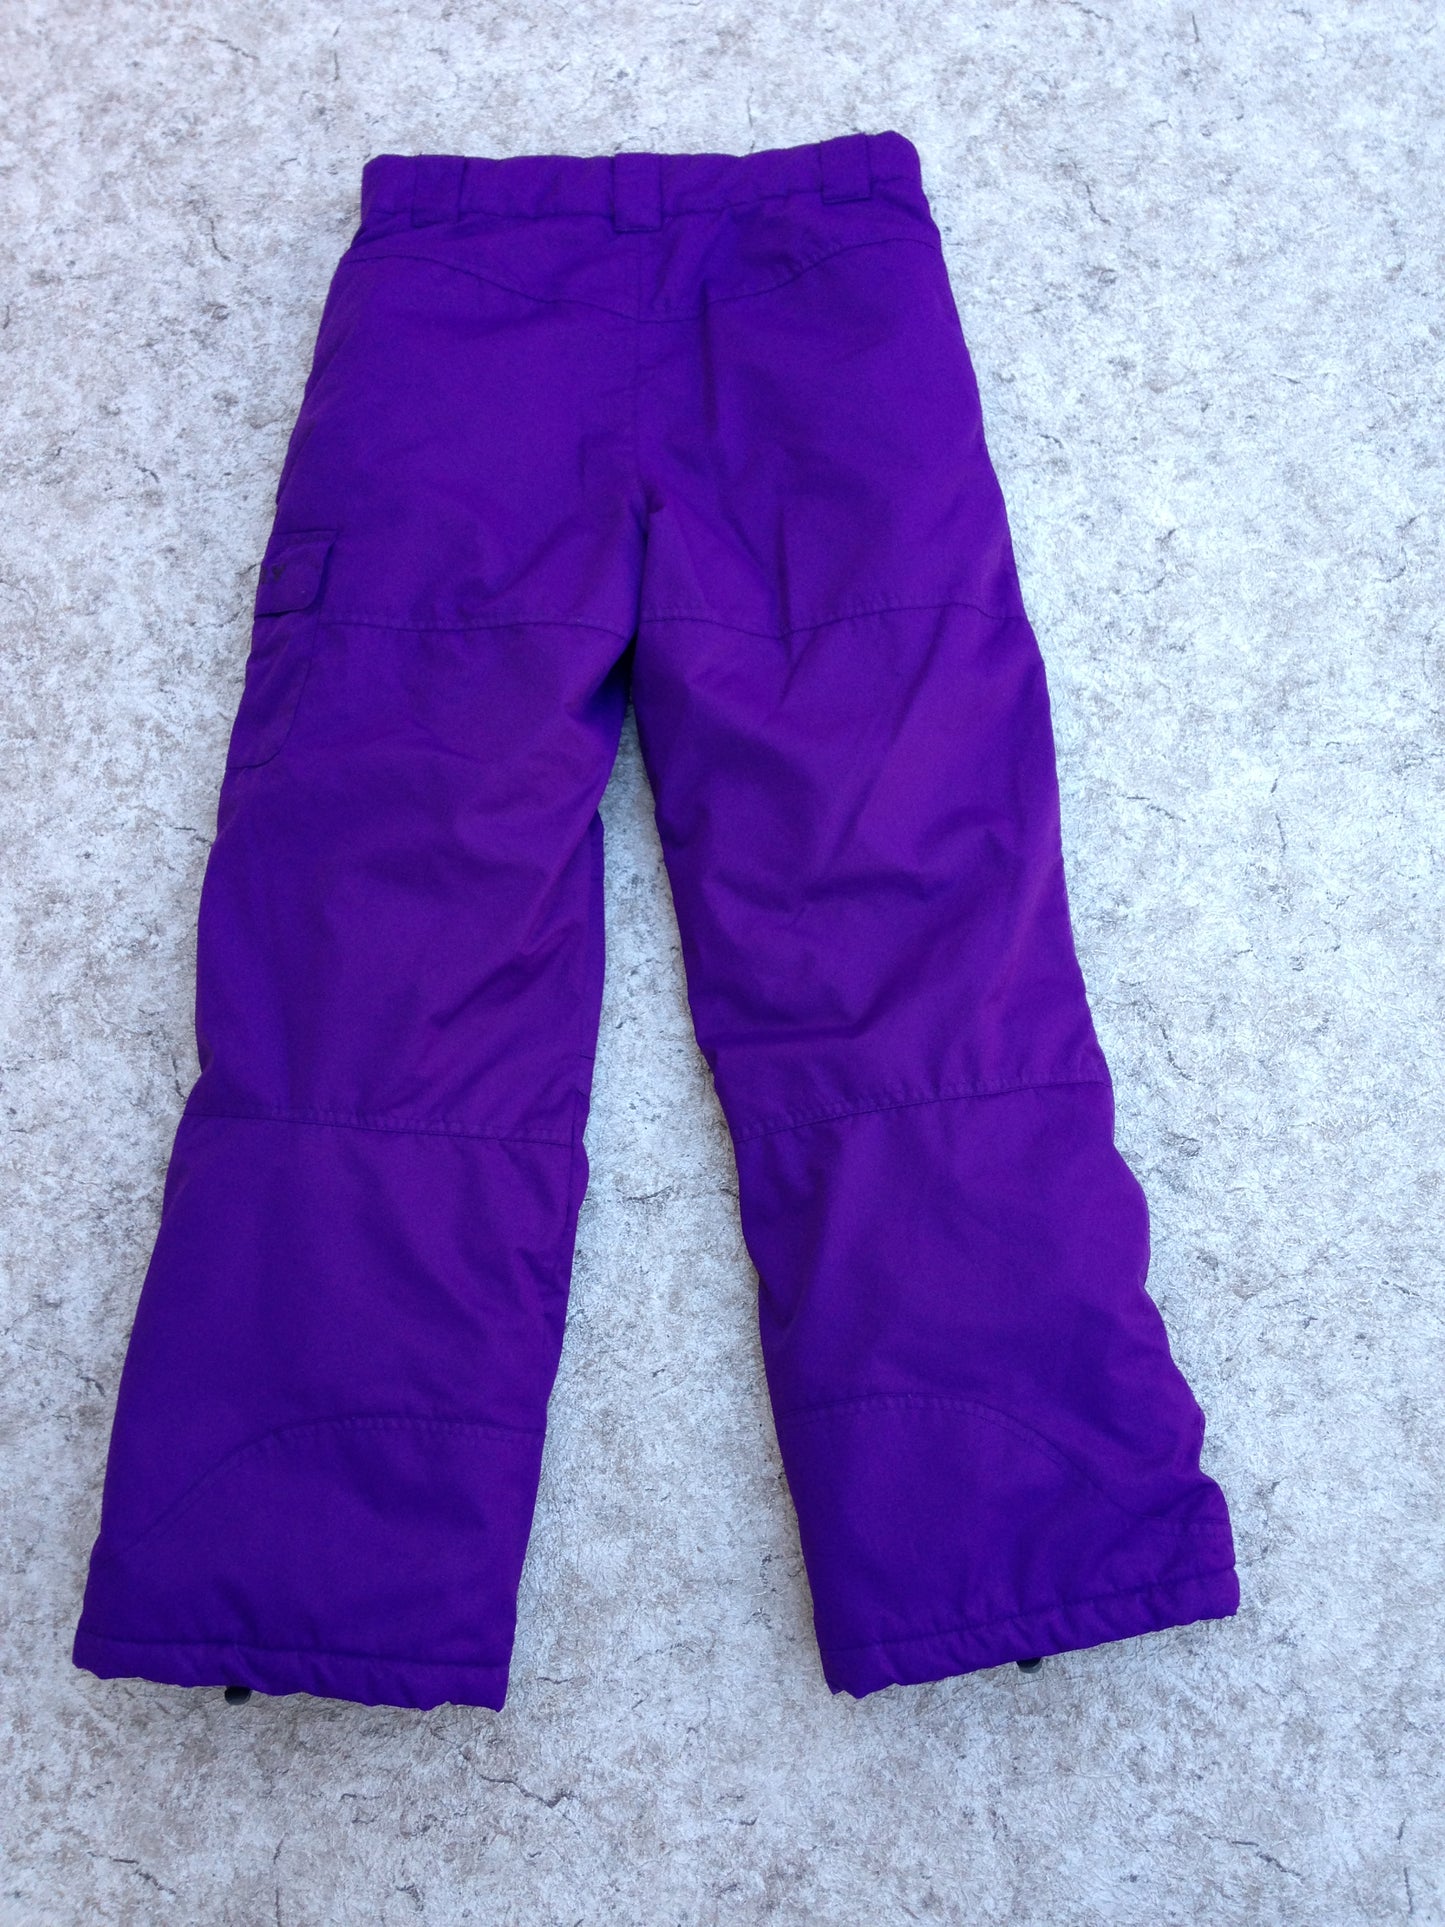 Snow Pants Child Size 14-16 Youth Firefly Purple Snowboarding New Demo Model